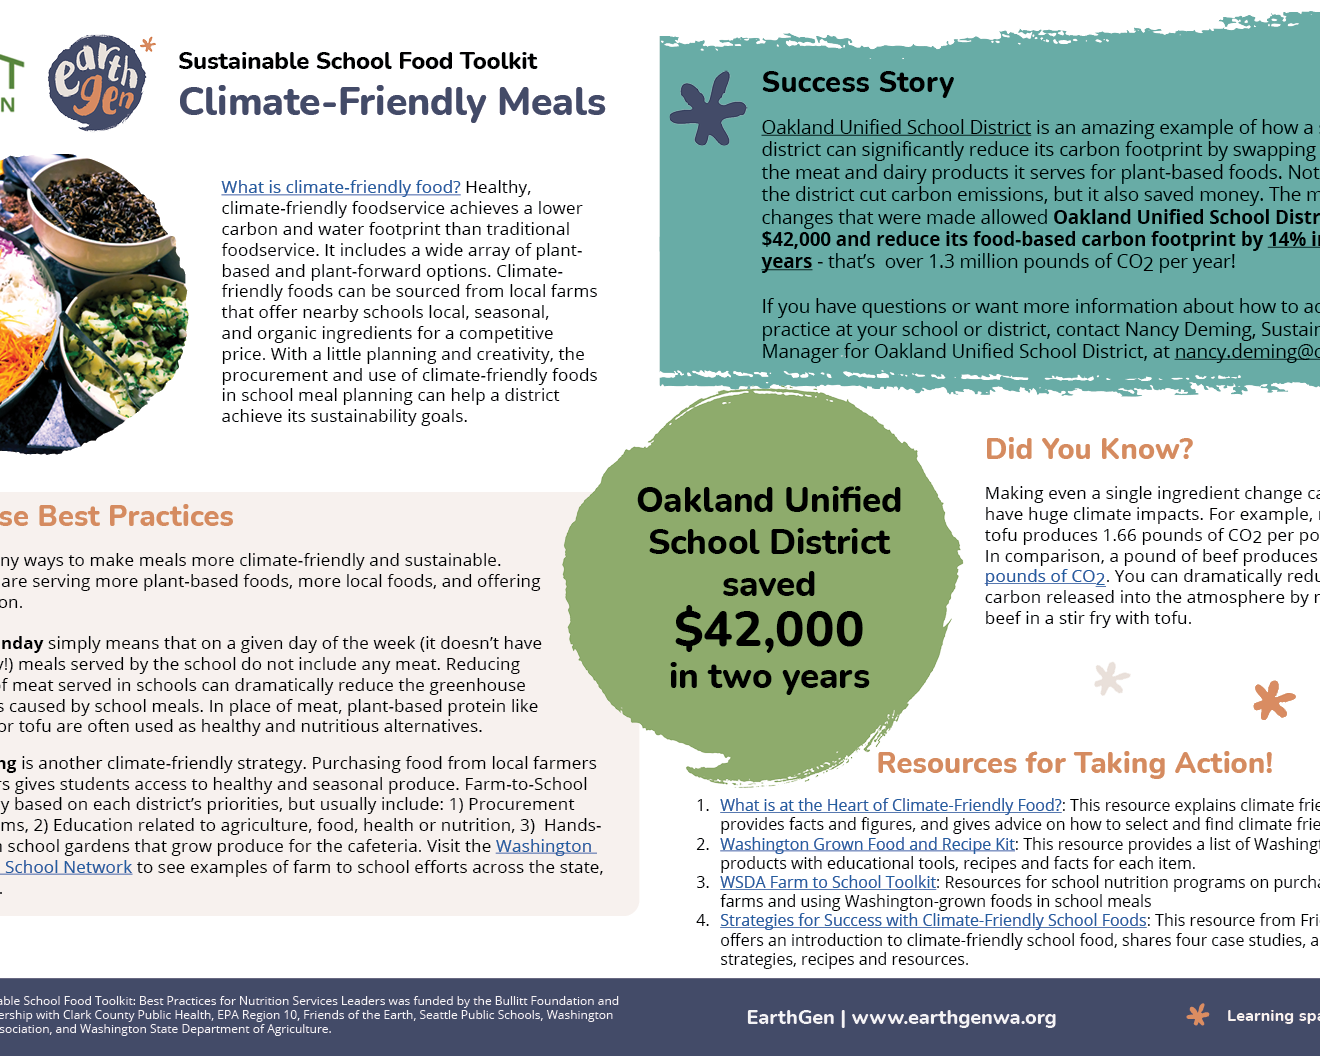 Sustainable School Food Toolkit Aims to Reduce Impact – EarthGen